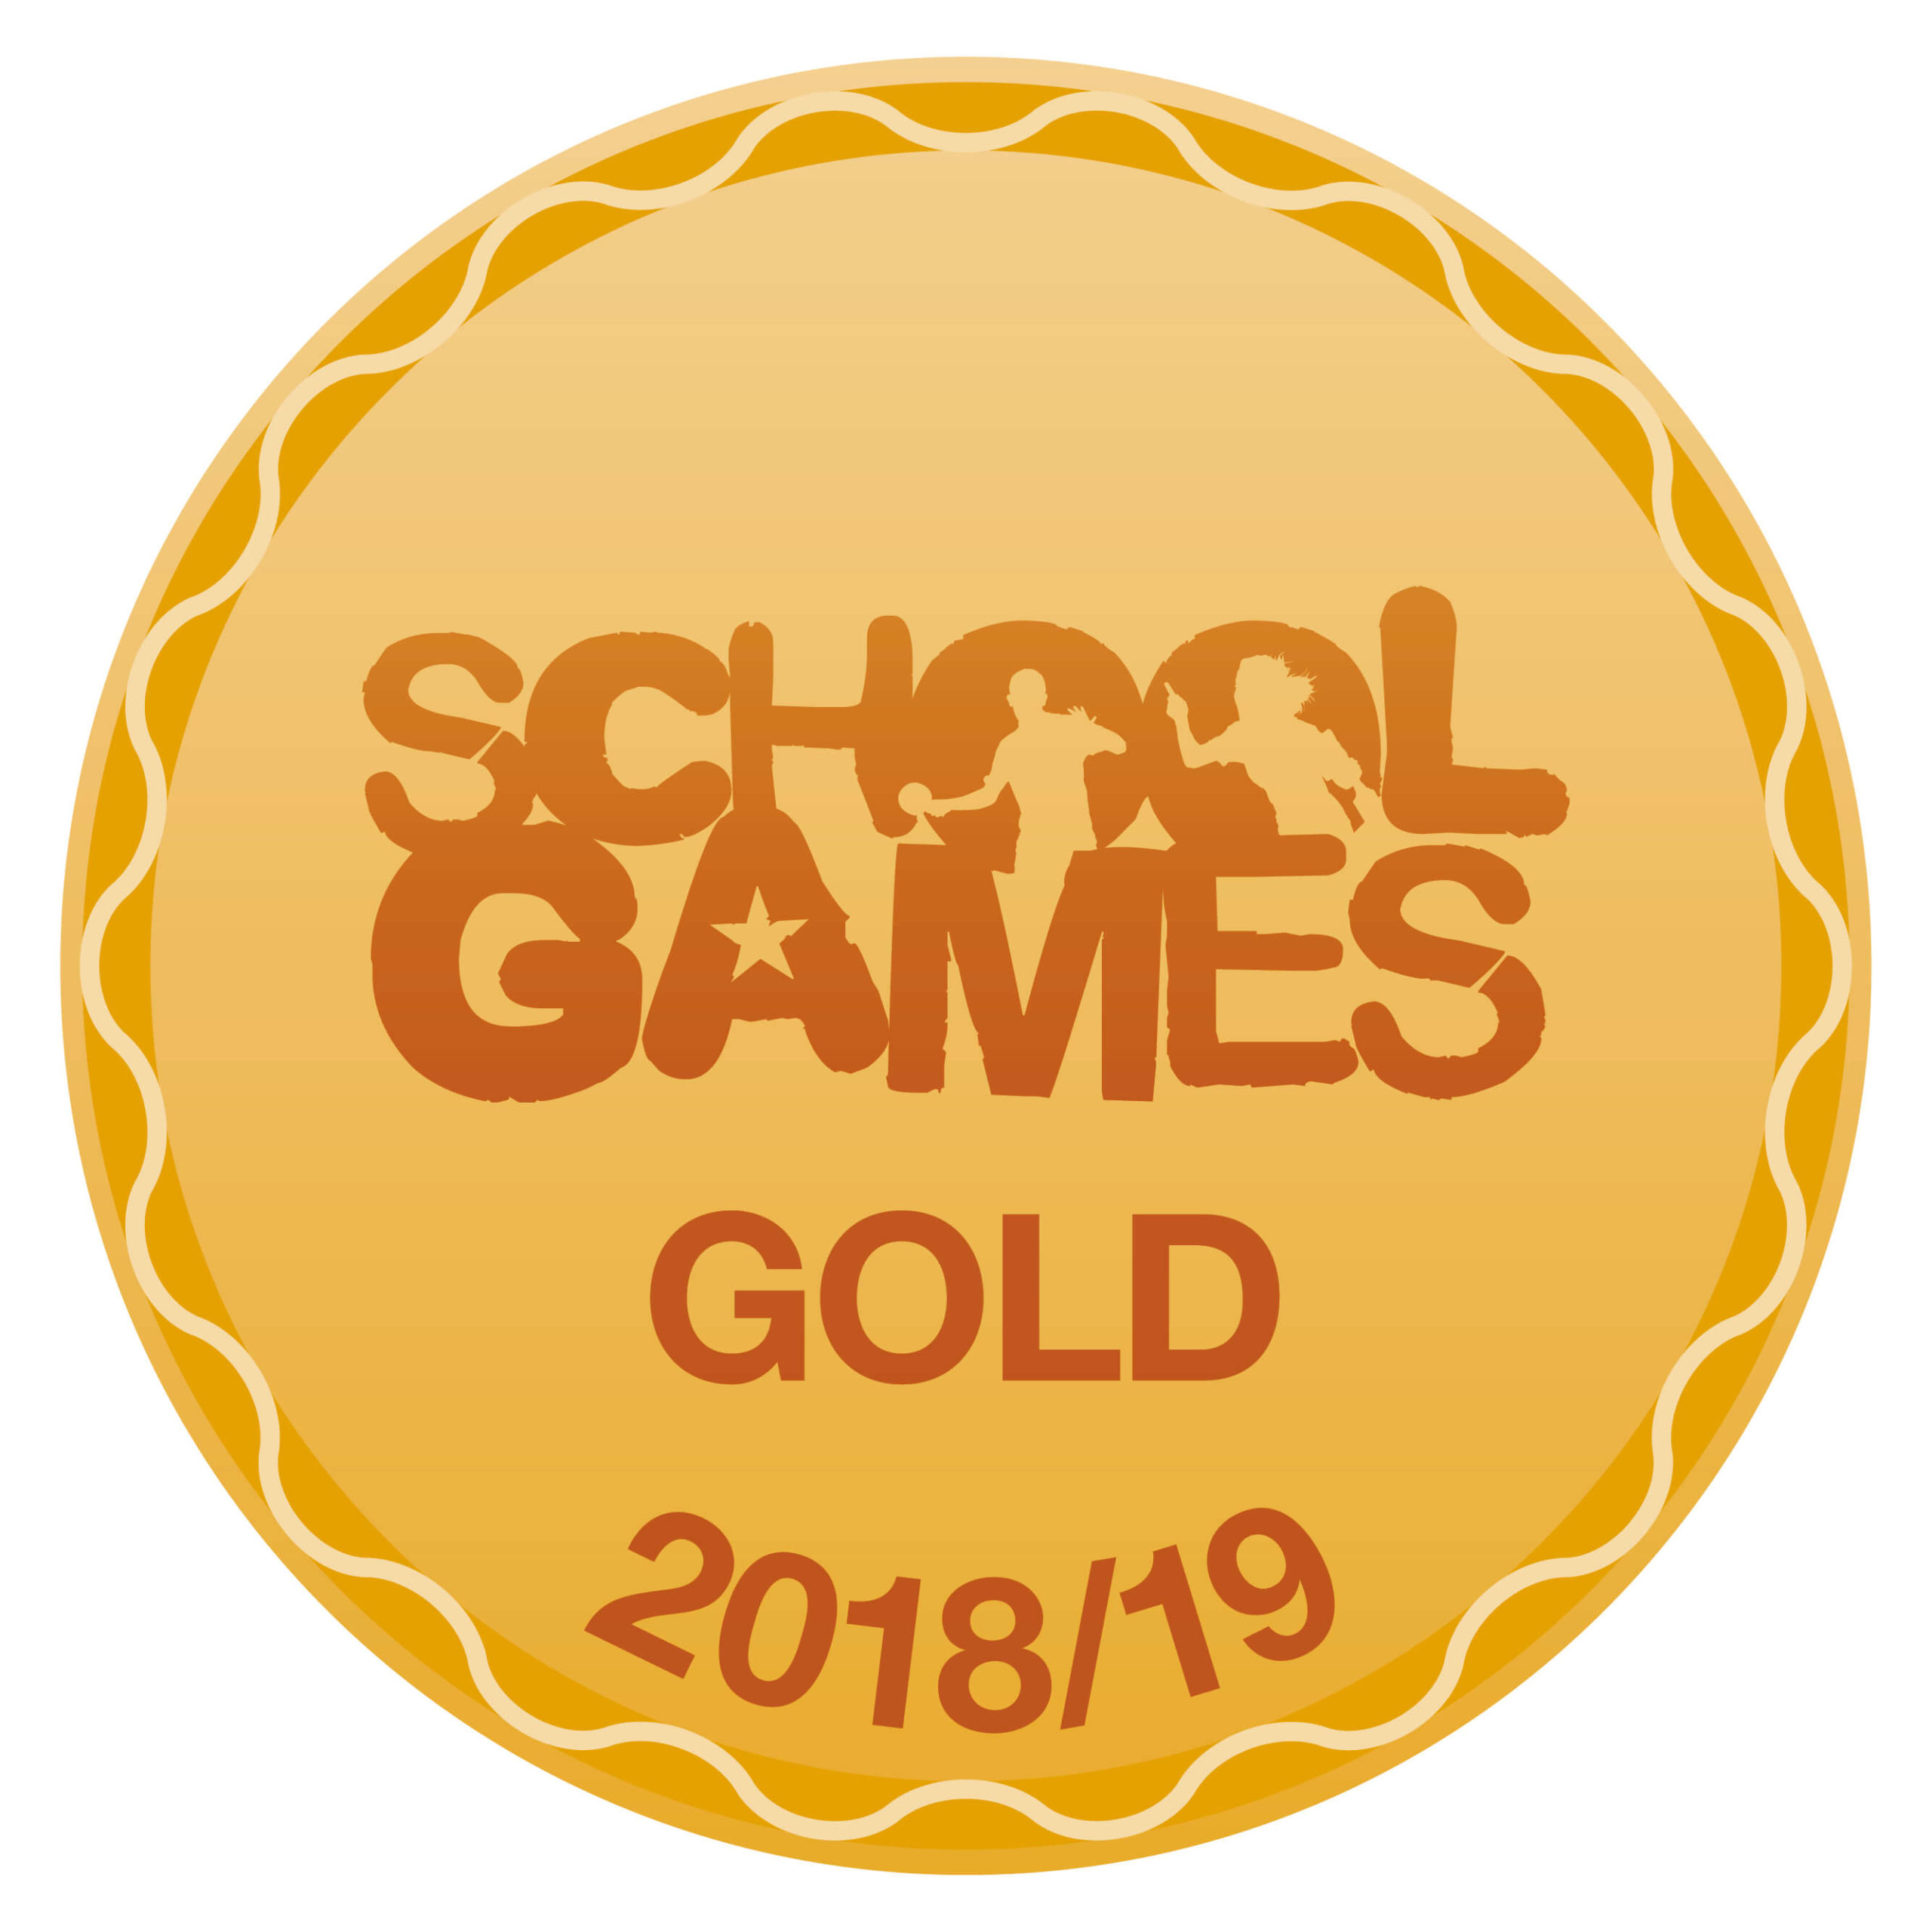 https://www.parkendprimary.co.uk/wp-content/uploads/2020/07/SG-L1-3-gold-2018-19-2-scaled.jpg